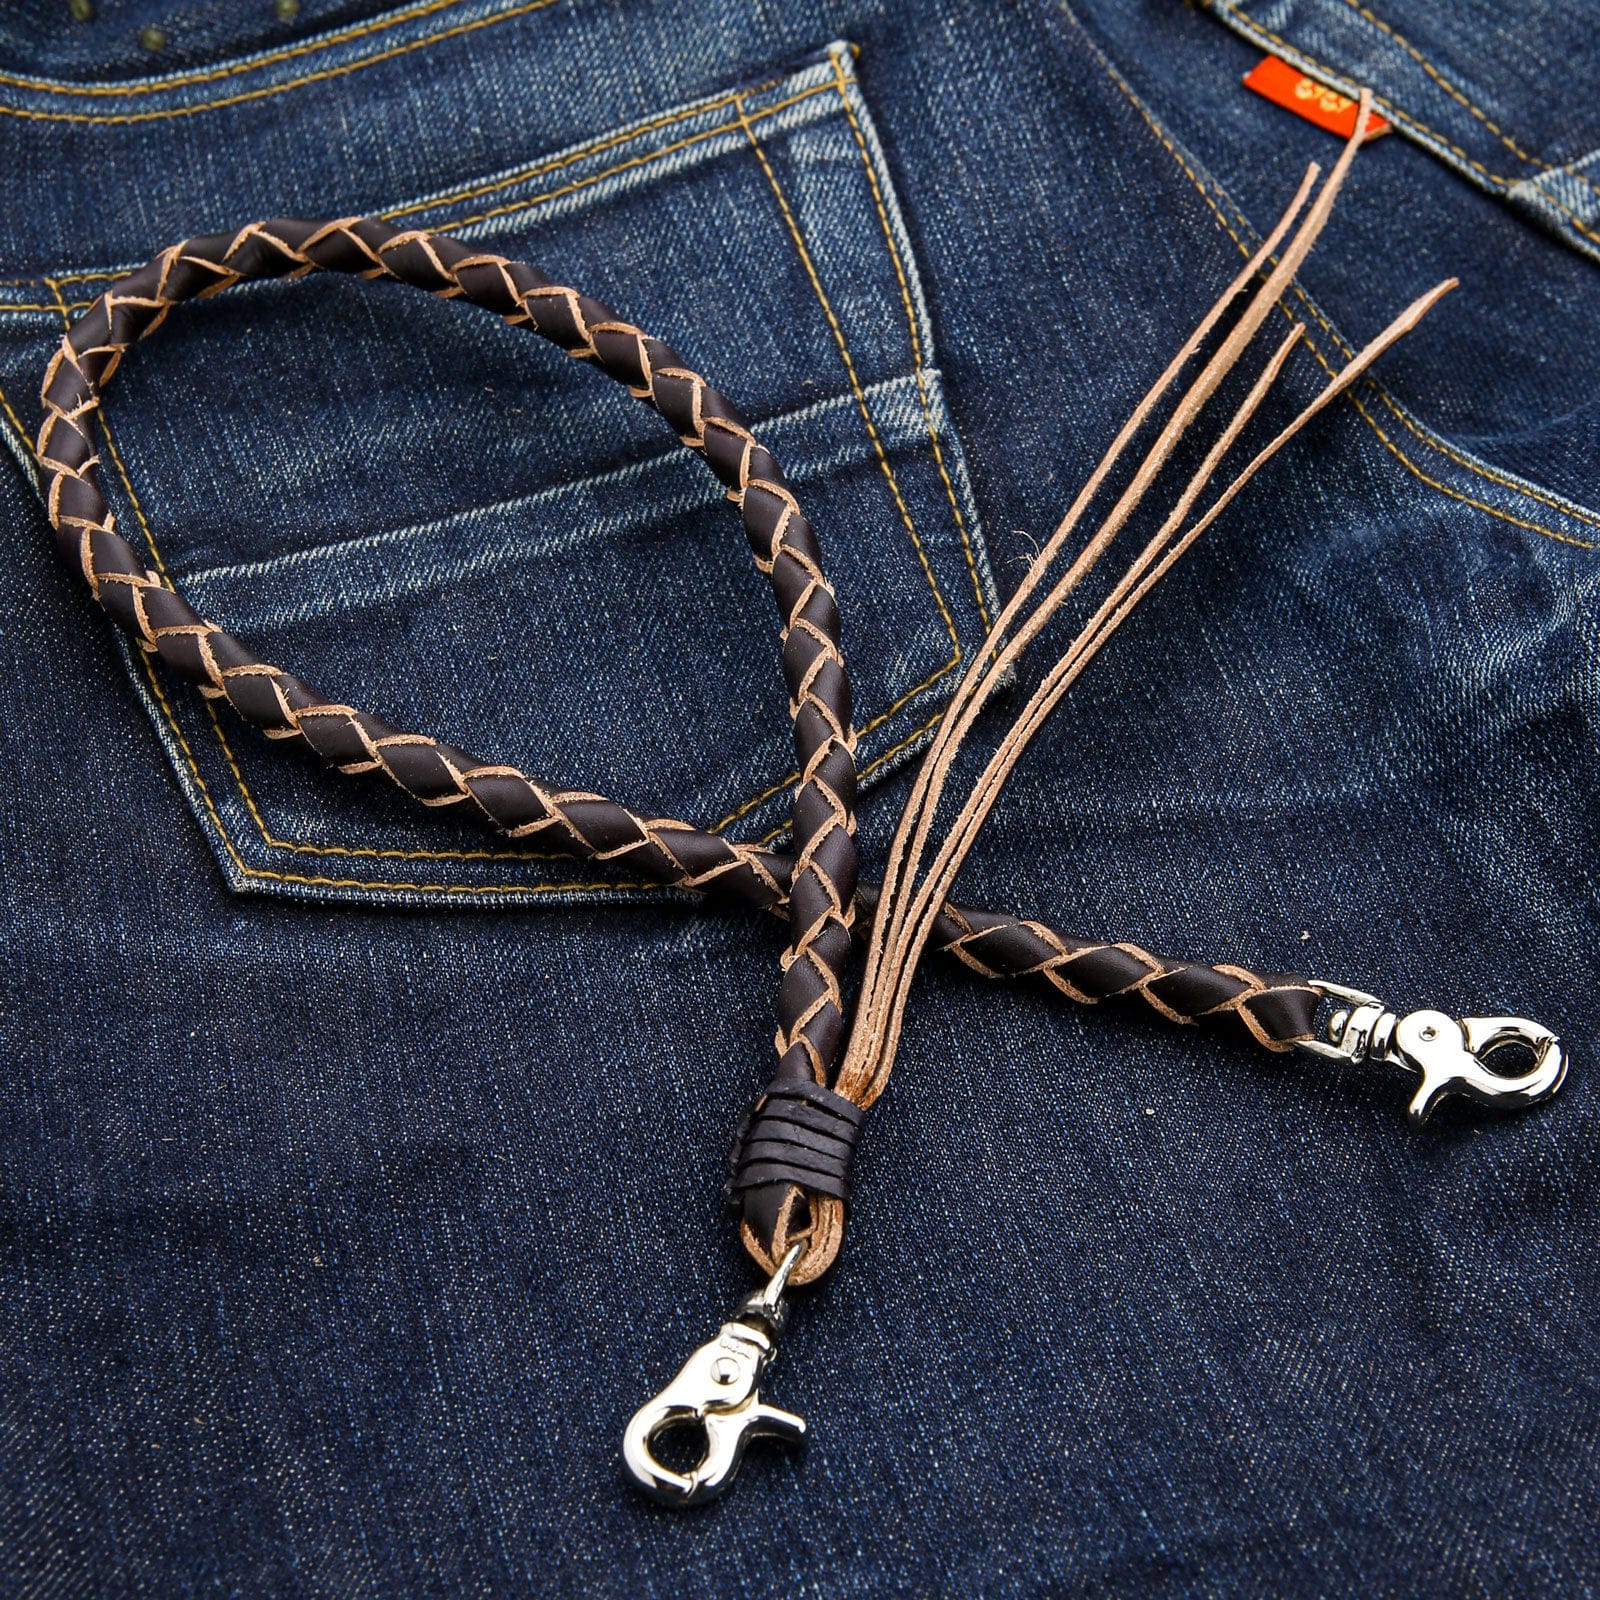 Short Trucker Wallet With A Ring for Chain or Lanyard Stylish 